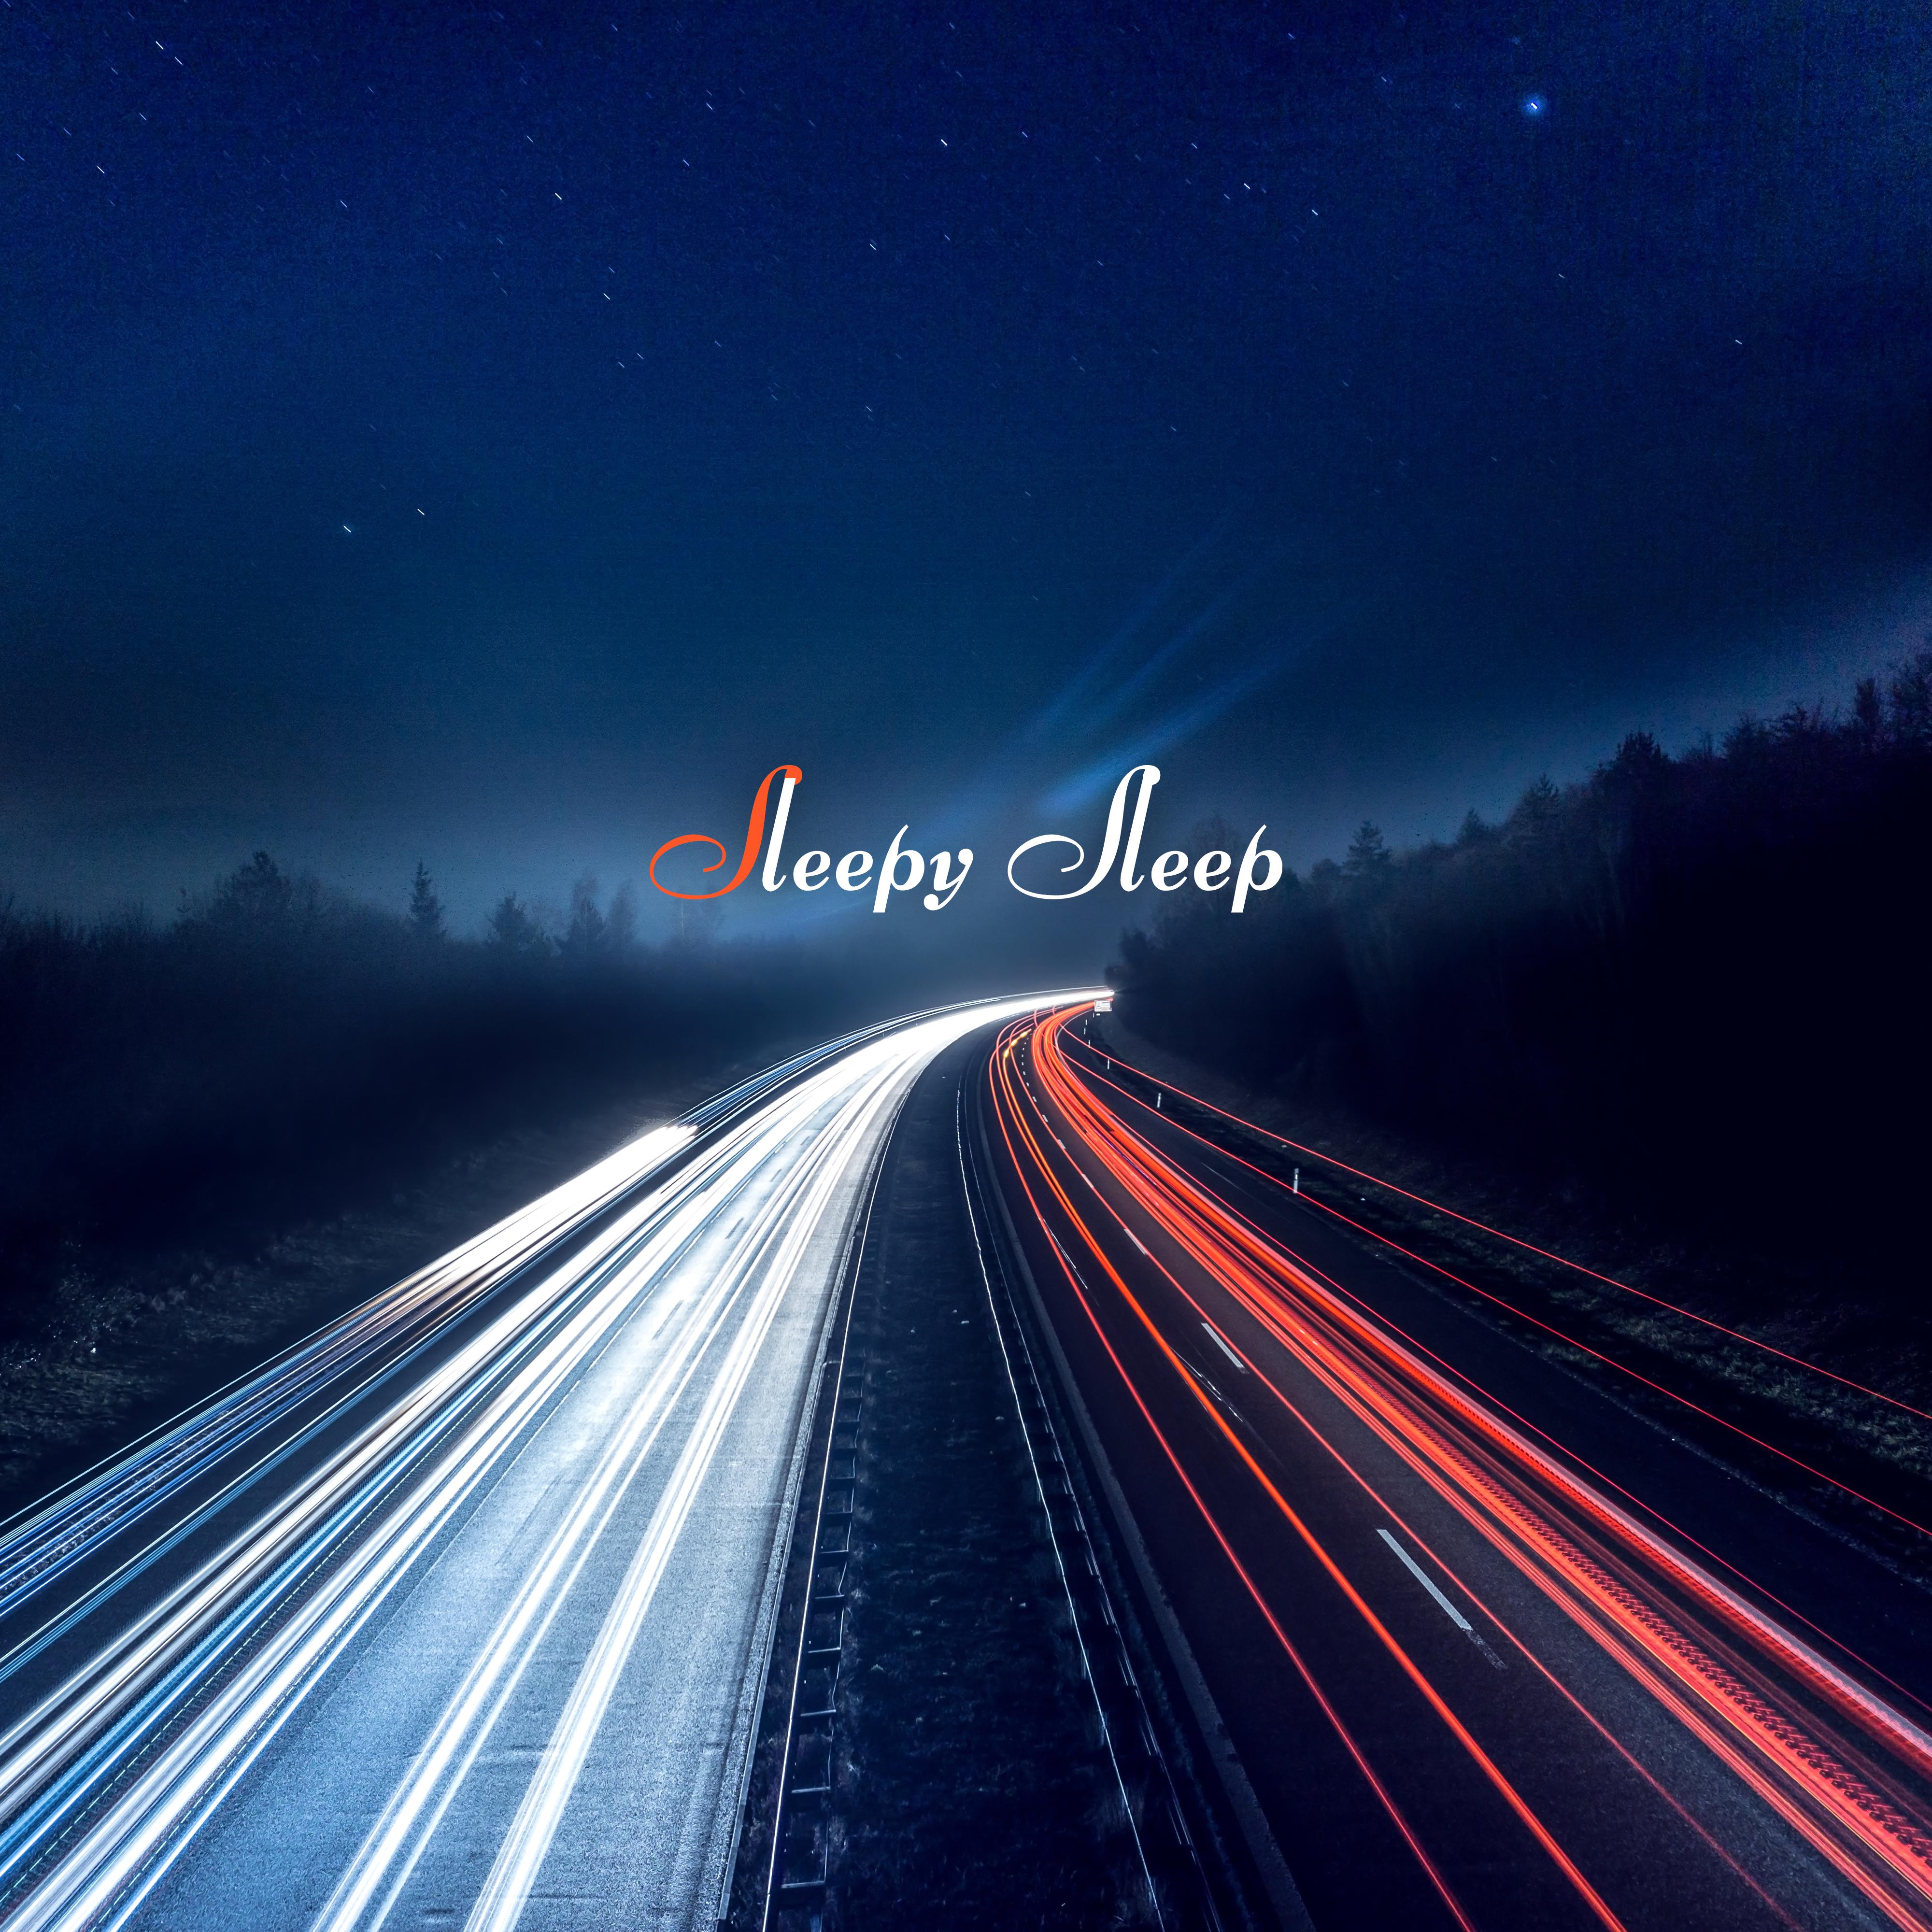 Sleepy Sleep – Relaxing Music to Bed, Nice Dream, Therapy Sounds, Restful Sleep, Healing Lullabies at Goodnight, Harmony